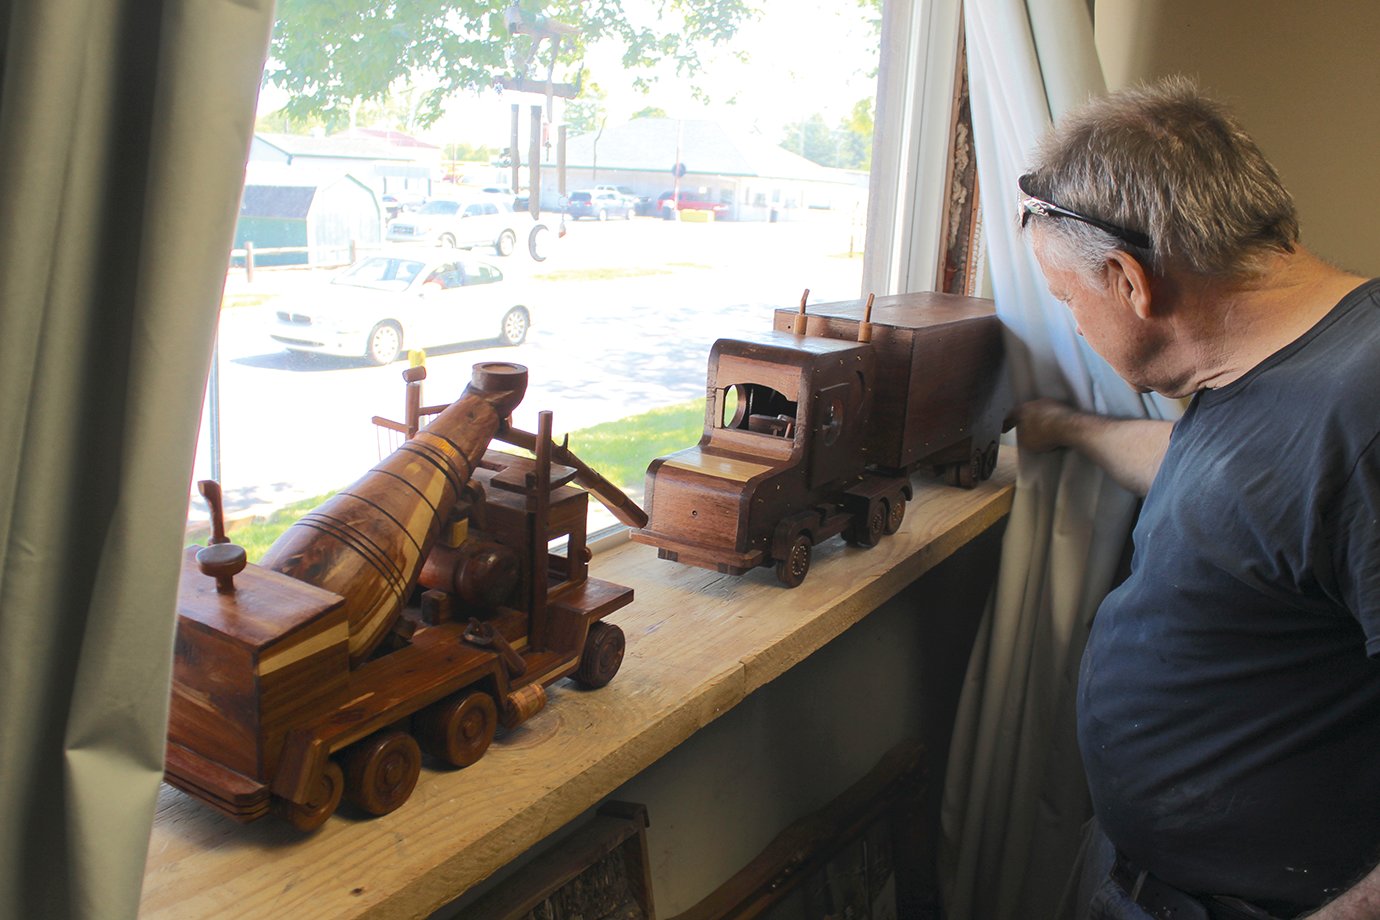 Jeff Osborn’s creations line the windows of a building he recently purchased at the corner of Oak and Main streets, giving passersby a glimpse at his goal of opening a woodworking business.